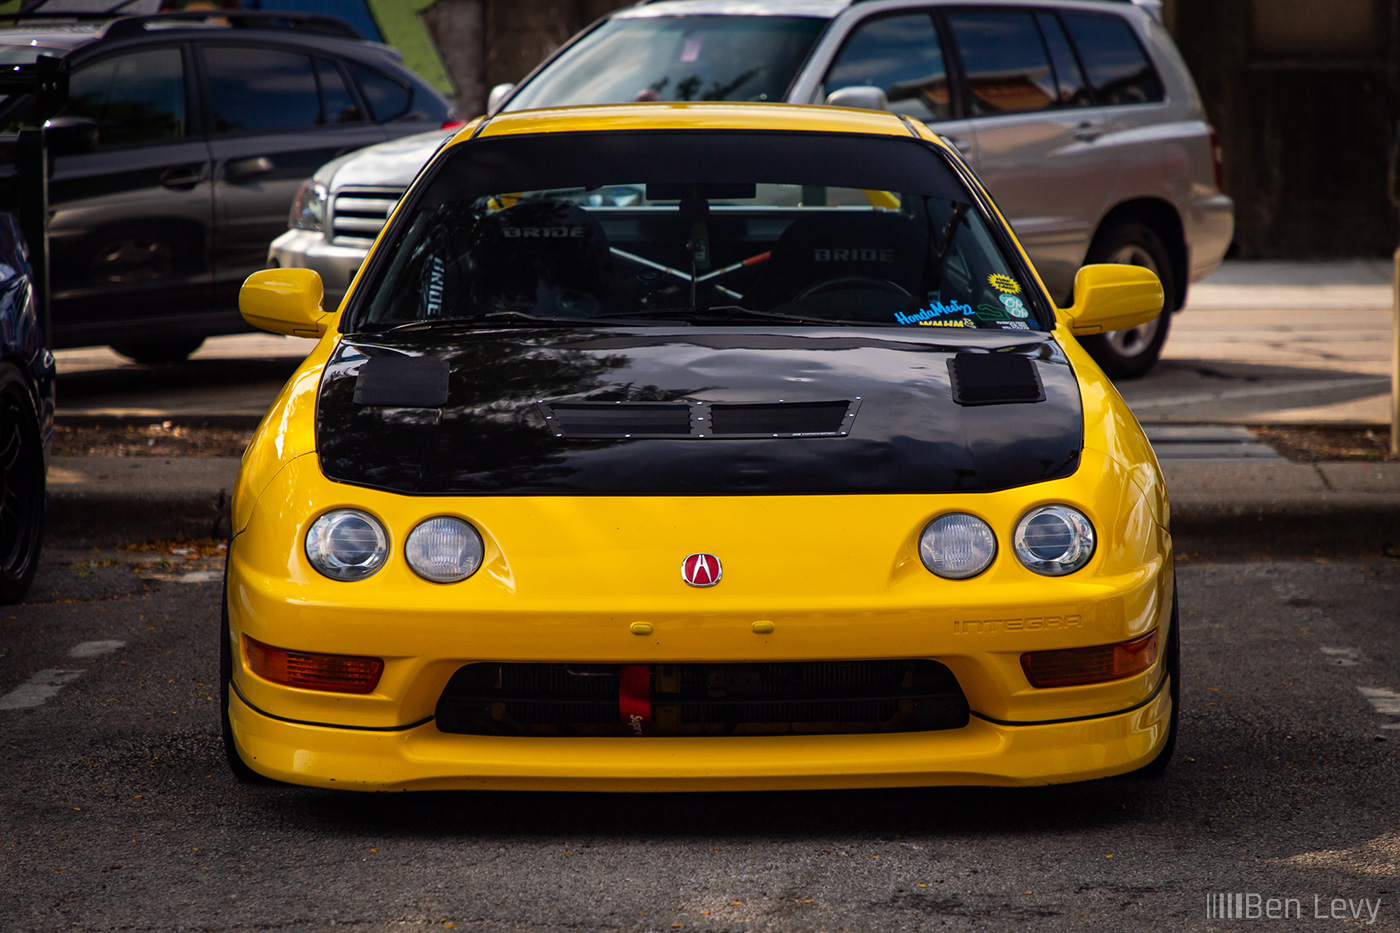 Yellow Acura Integra with Vented Hood